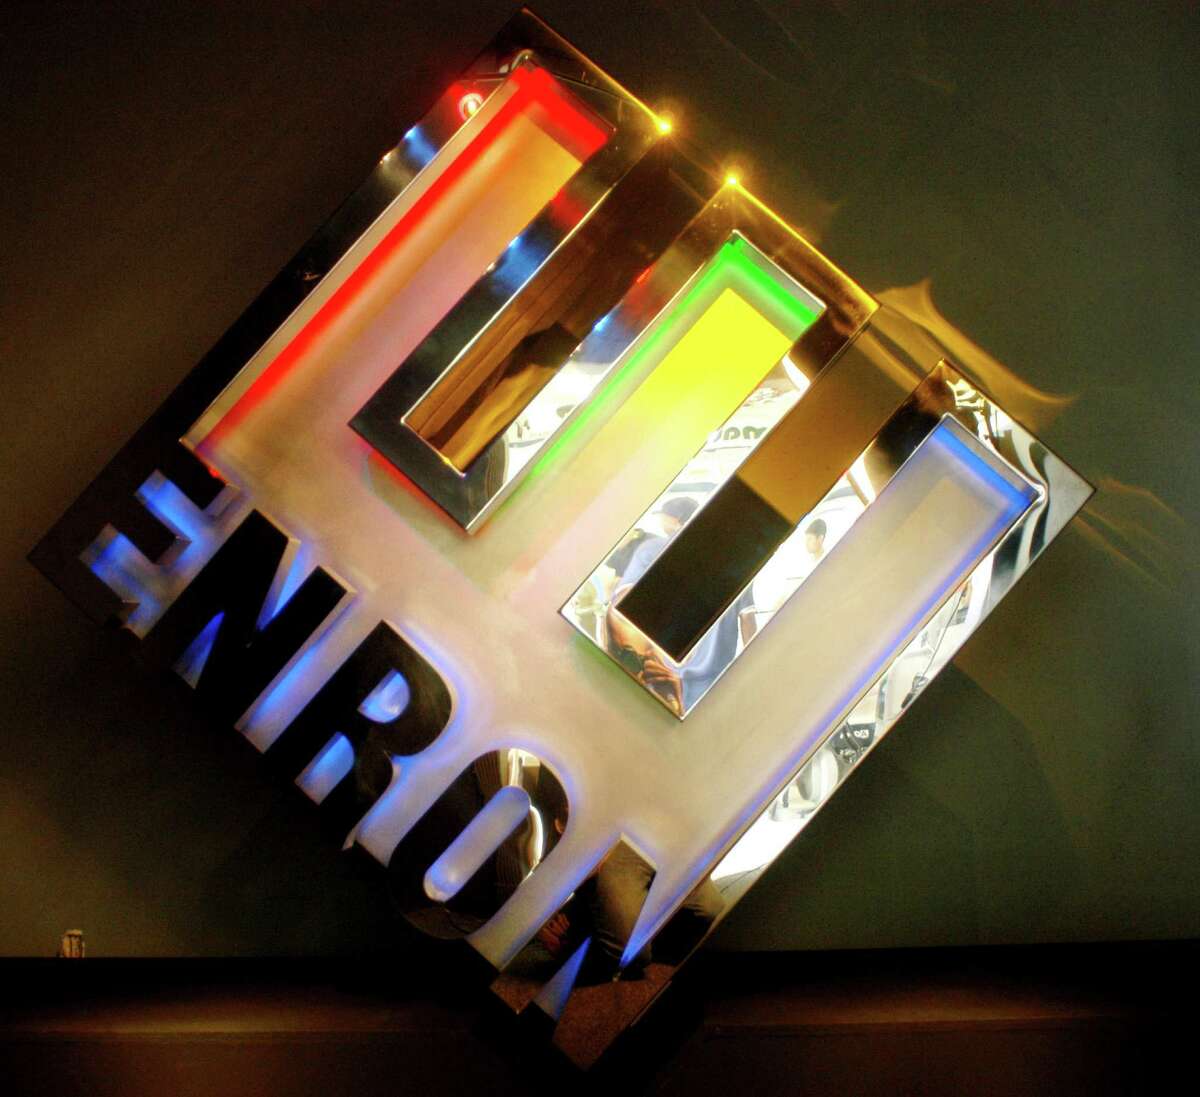 PHOTOS: The Enron Scandal In total, 32 people and one firm had charges brought before federal courts stemming from the energy giant's fallout.  >>See what happened to some of the biggest players in the Enron scandal.